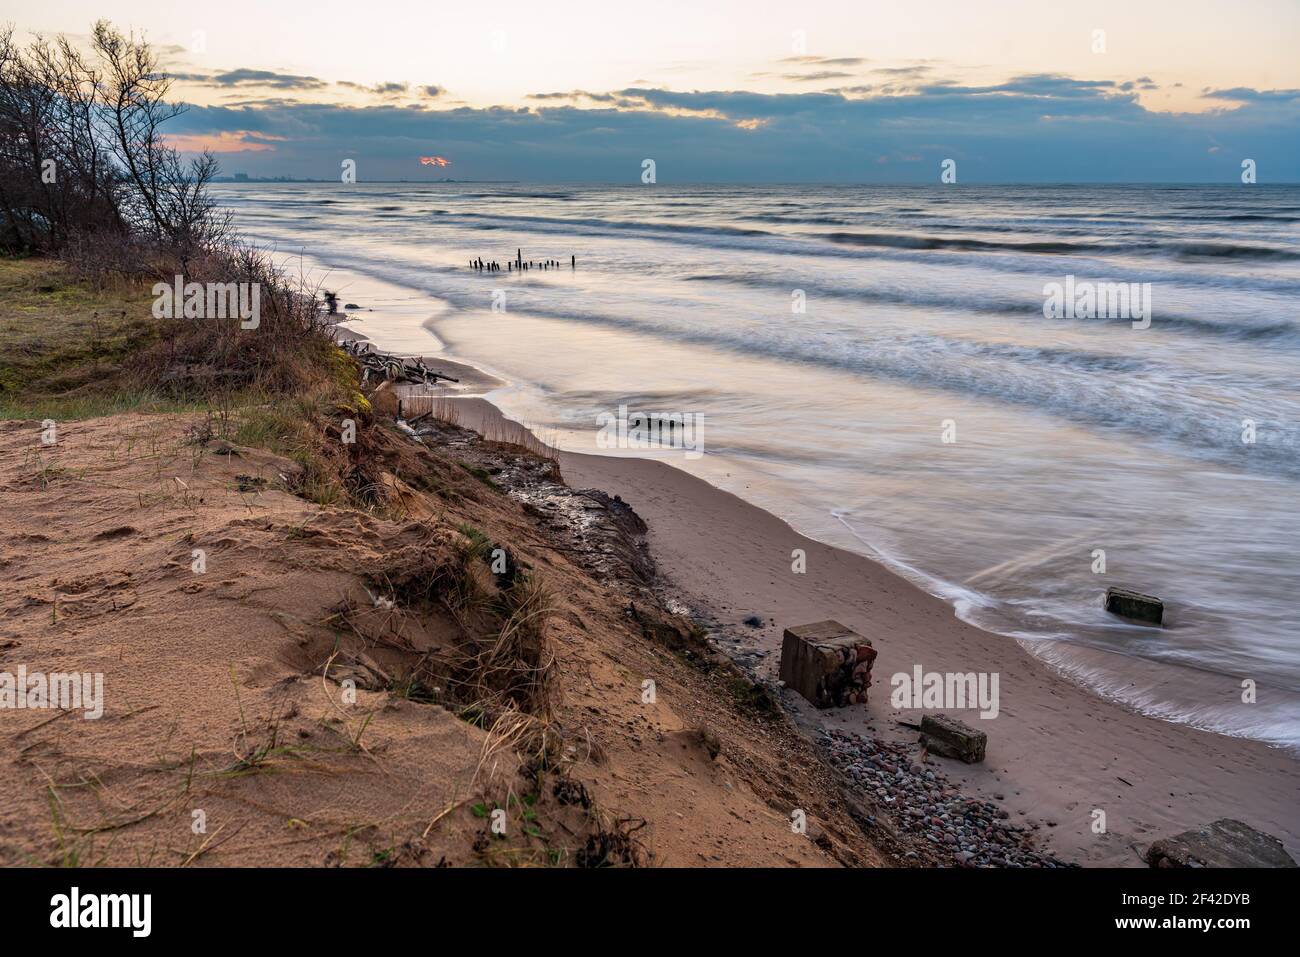 cliff at sunset by the sea and the remains of the building wall left on the beach after the cliff collapsed and the house collapsed Stock Photo